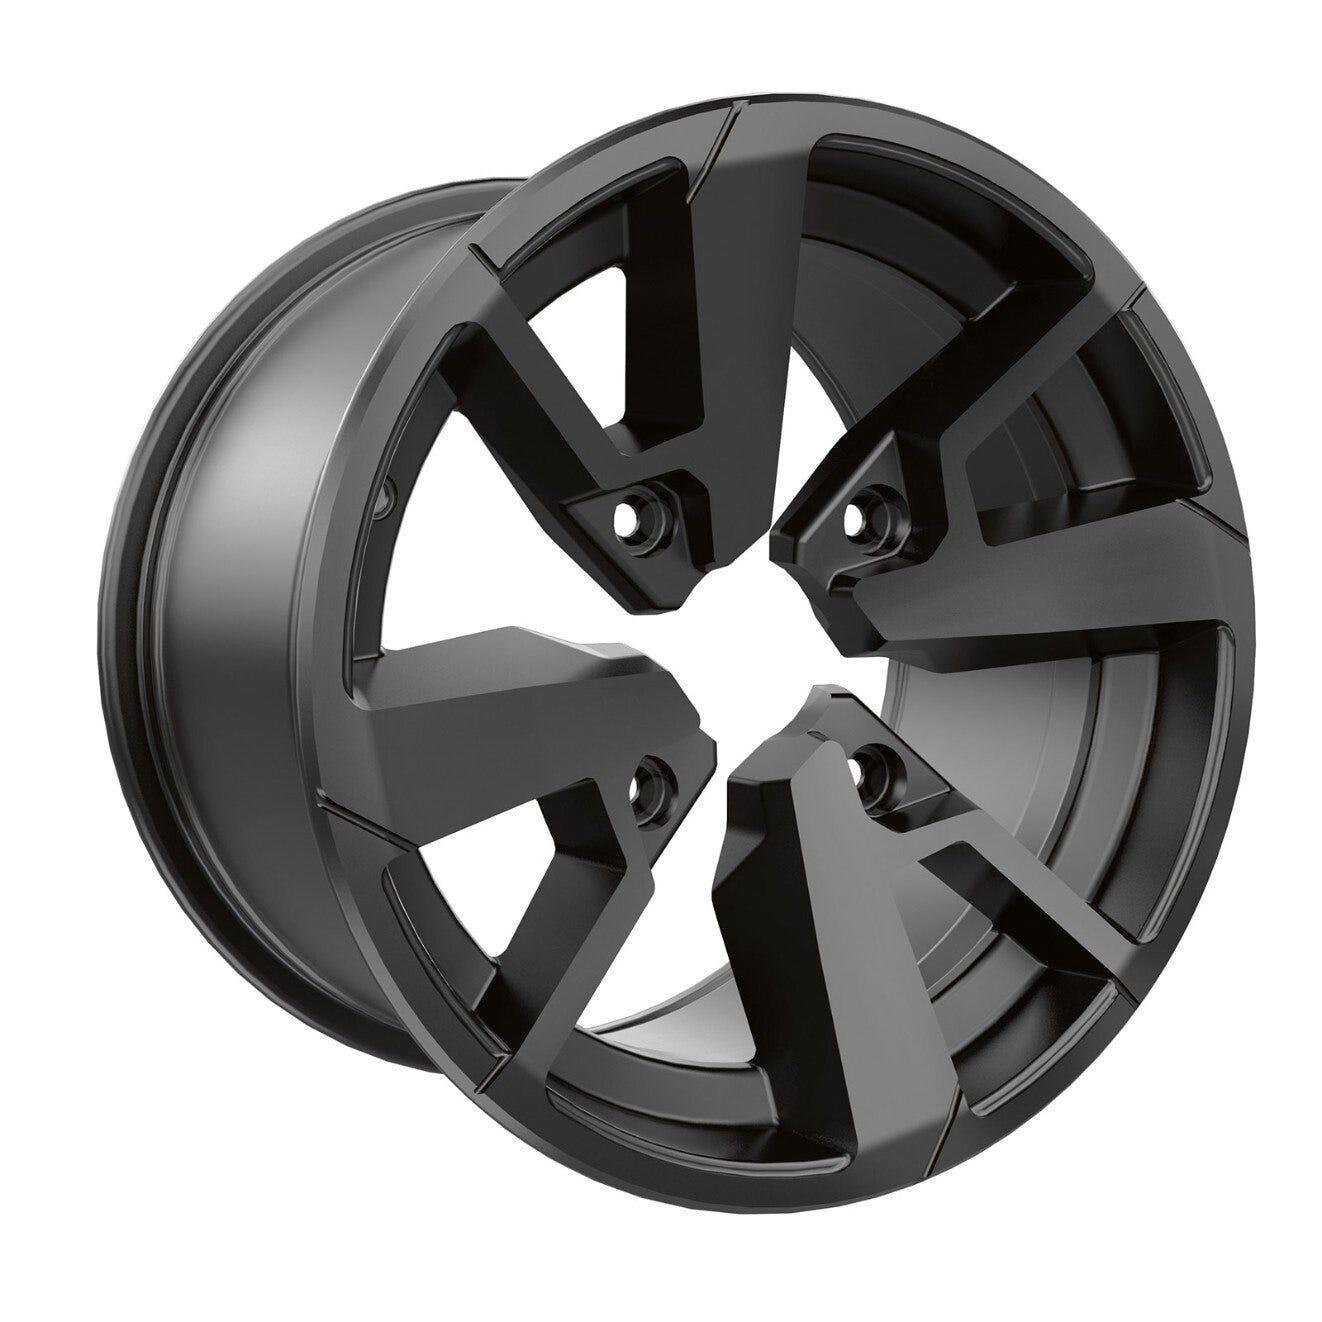 14" Rim - Rear / Black with clear coat - Factory Recreation